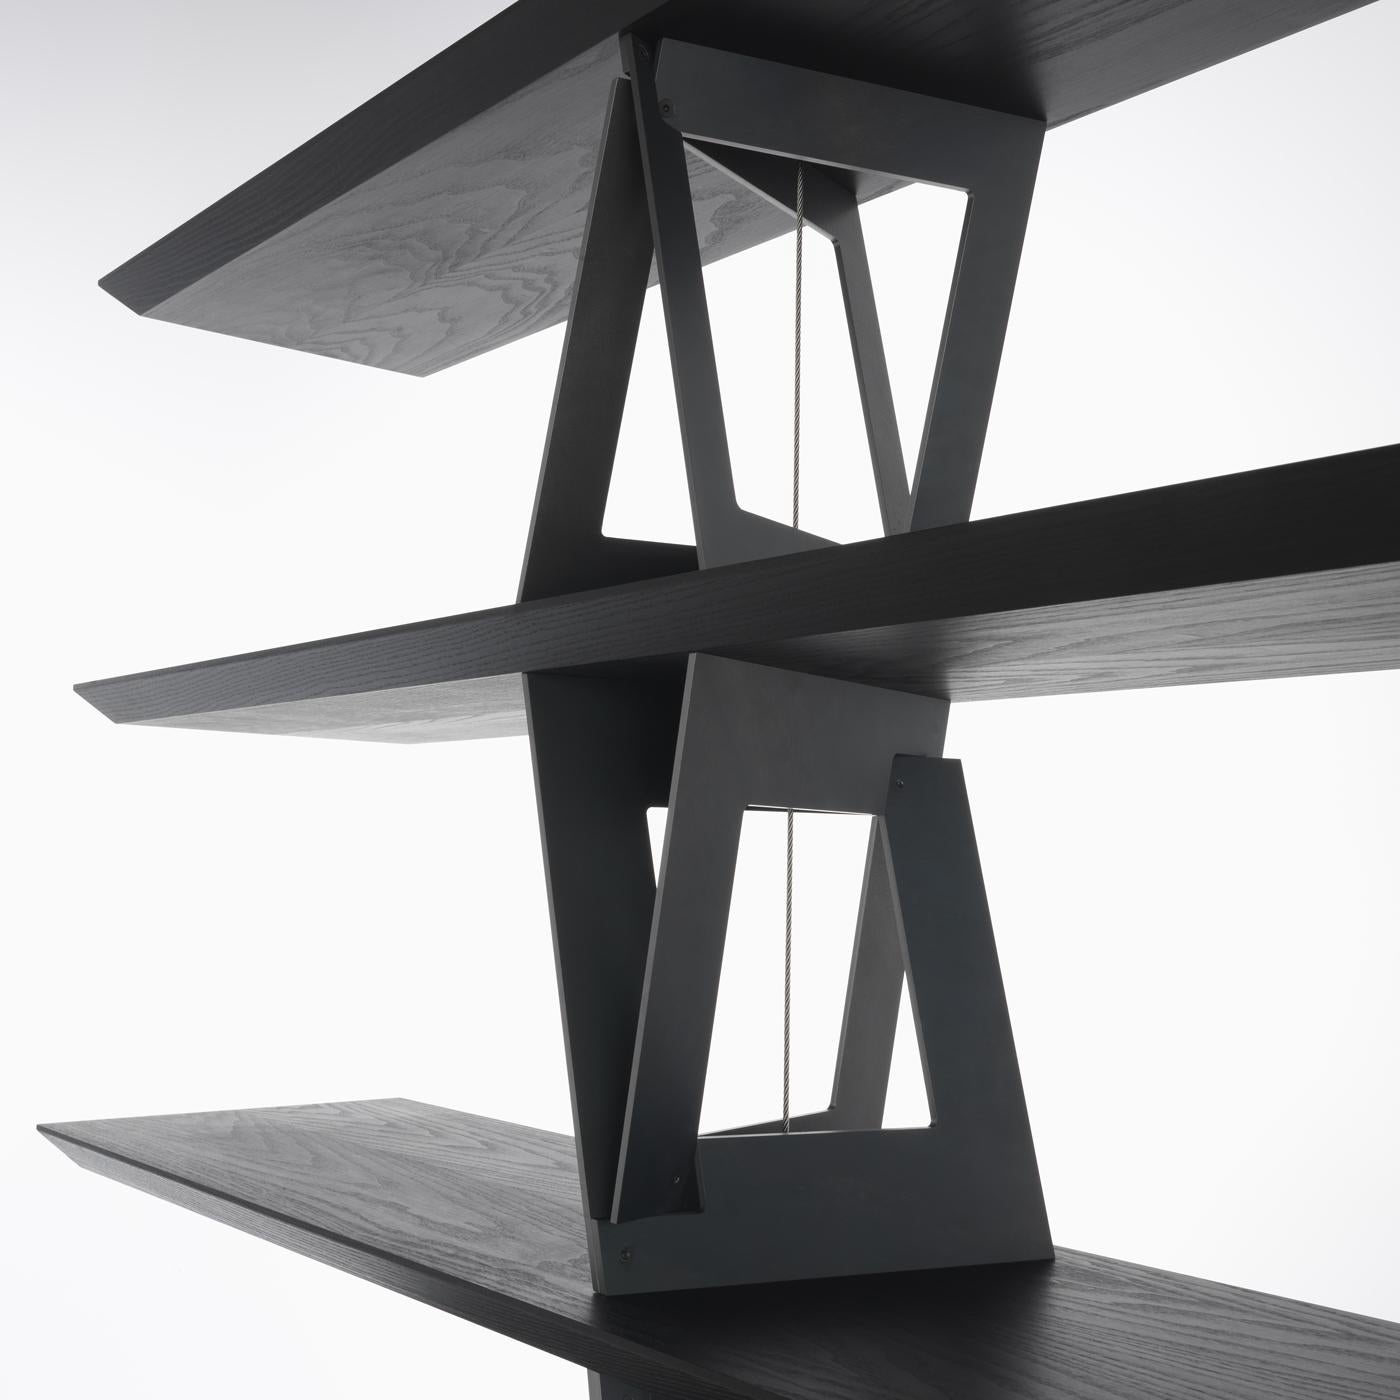 A sculptural work of art of interior design, this bookcase by Dror boasts a captivating and unique silhouette, combining refined materials in a robust yet delicate structure. It comprises plywood and solid ash shelves with internal reinforcements